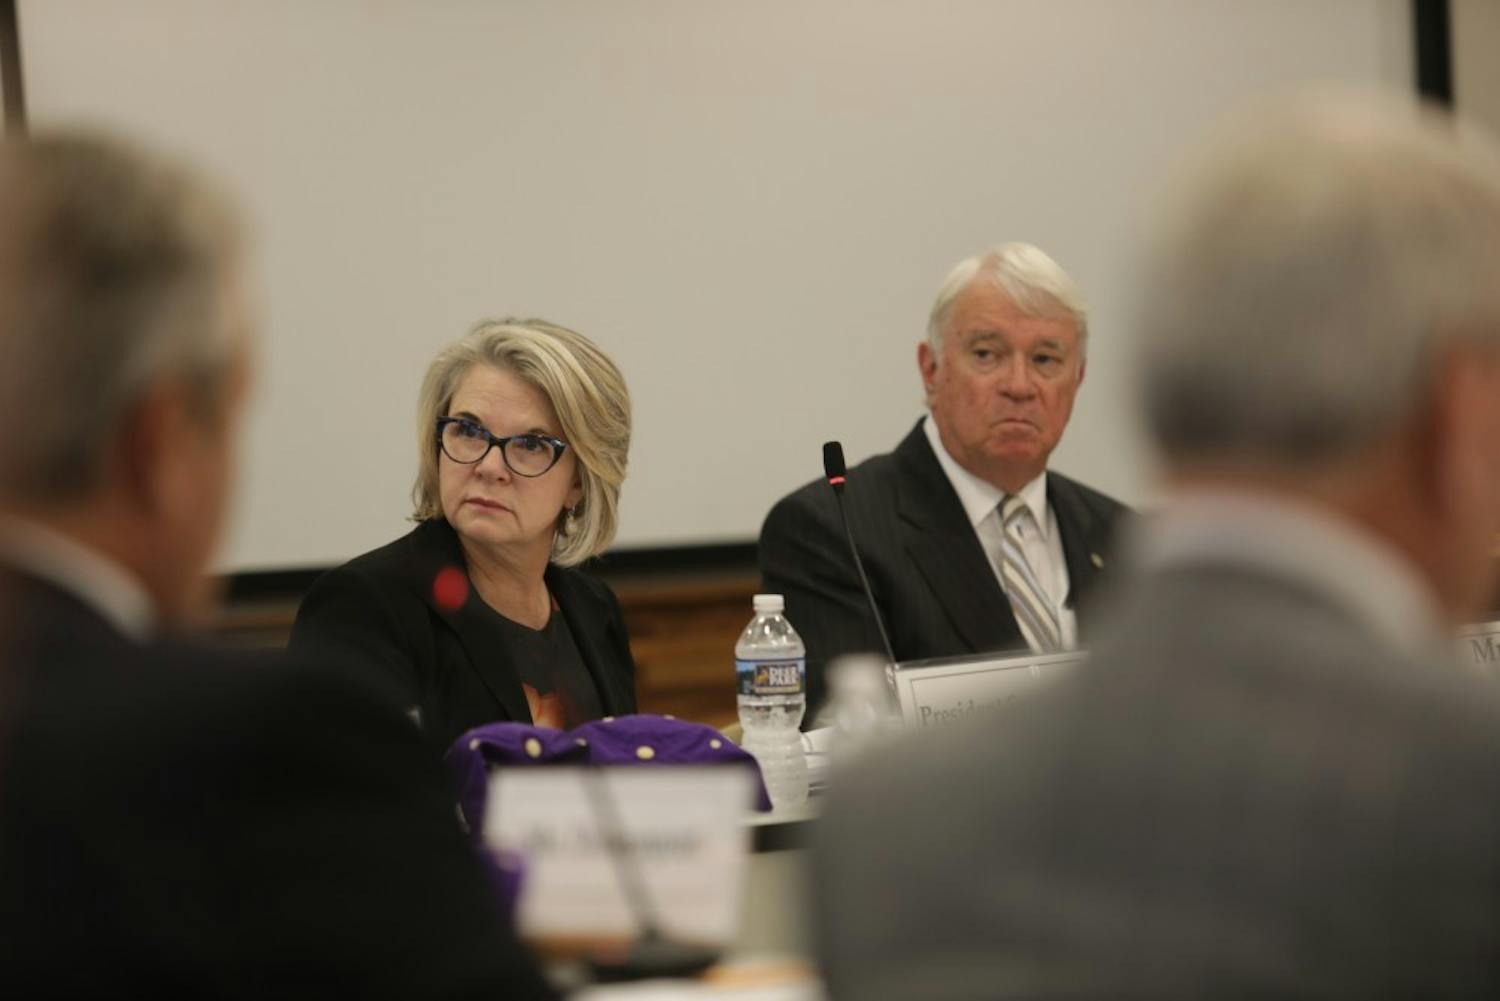 UNC-system President Margaret Spellings (left) sits next to chairperson Lou Bissette (right) during a September 2017 UNC Board of Governors meeting.